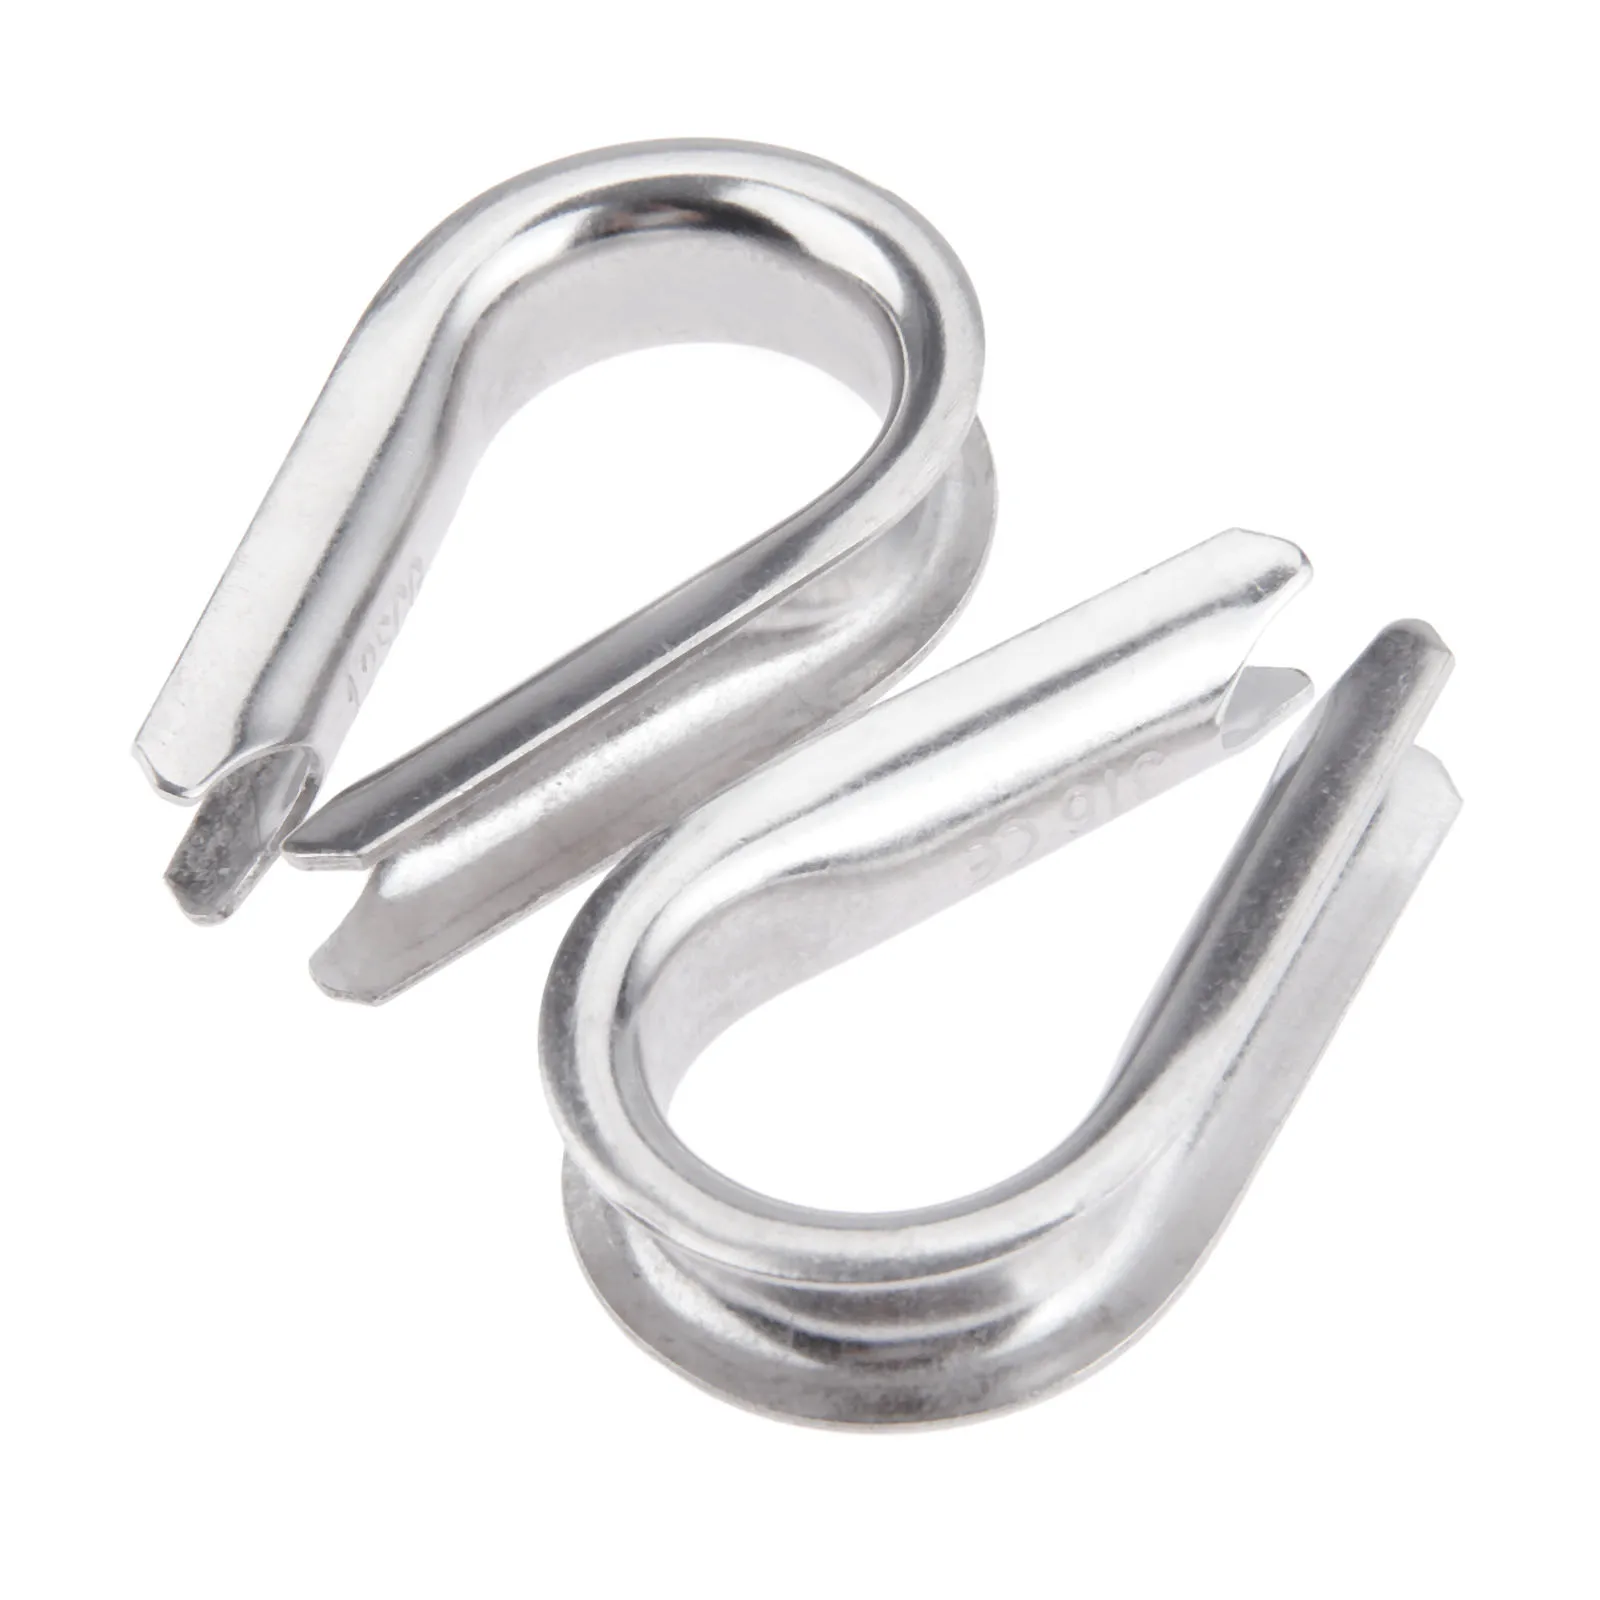 Stainless Steel Wire Rope Thimbles 12MM x2 Marine Webbing Boat Cable Loop 